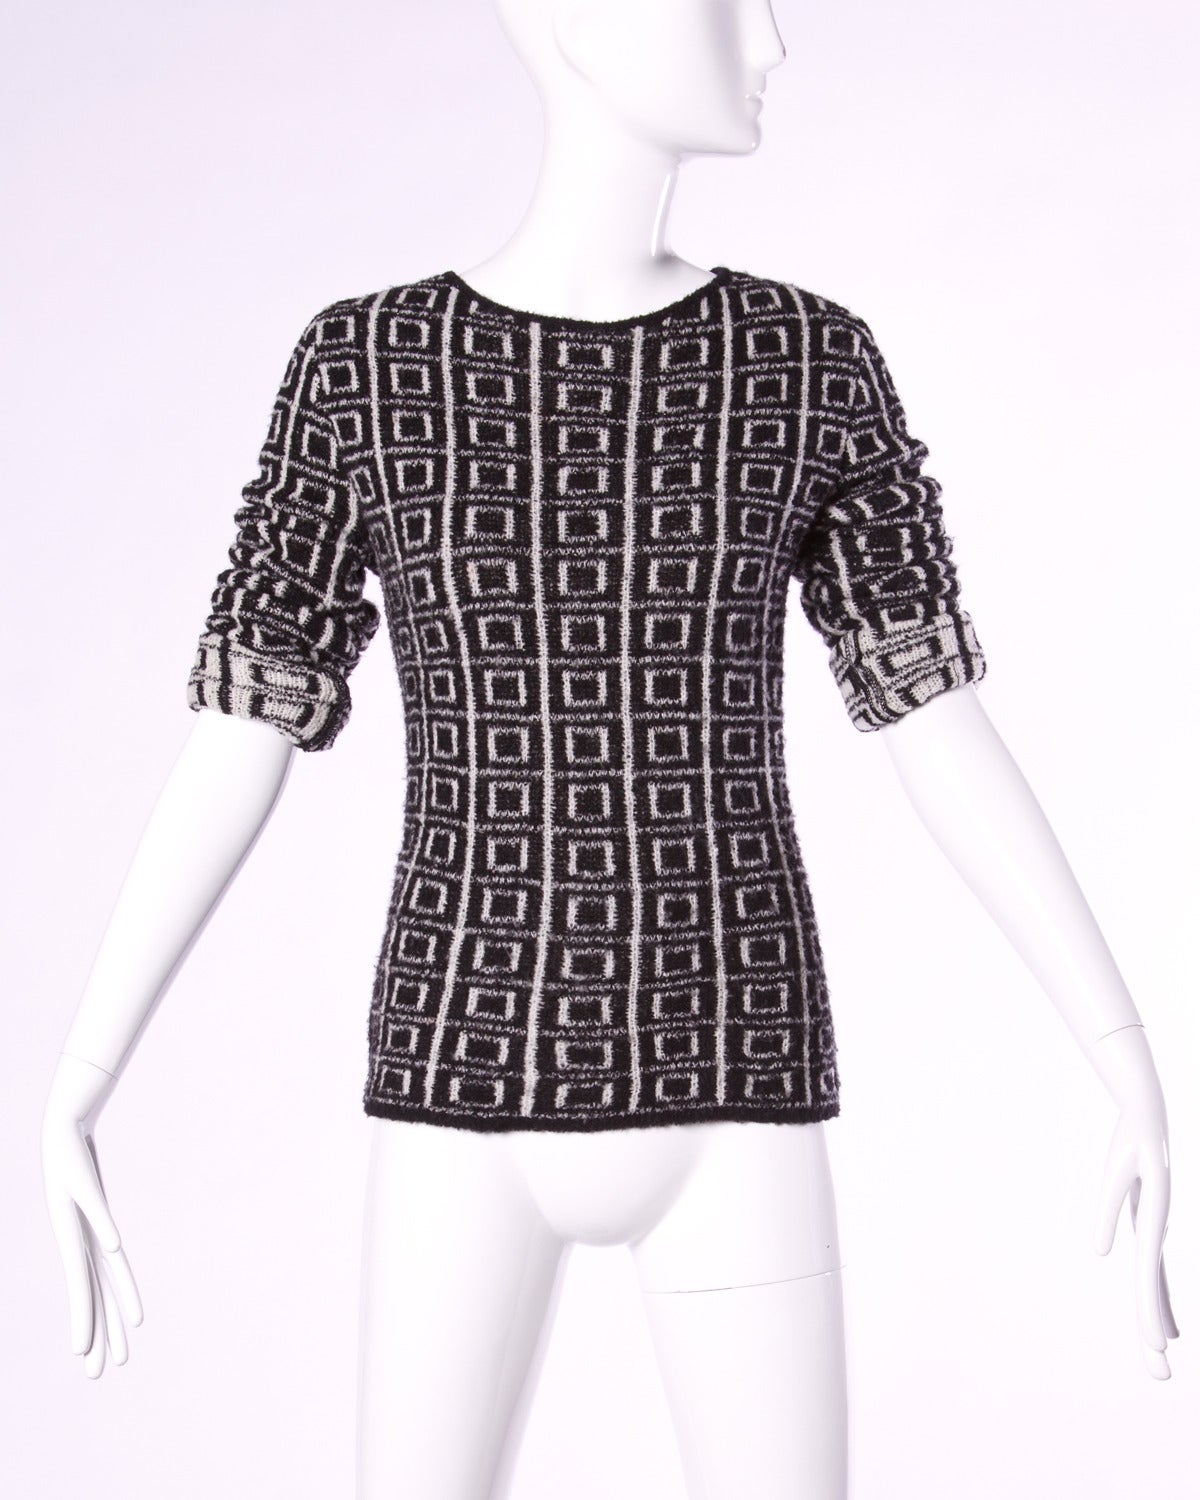 Vintage Krizia sweater with an allover black and white geometric square design.

Details:

Unlined
No Closure/ Fabric Contains Stretch
Color: Black/ White
Fabric: Wool Blend
Label: Krizia

Measurements:

Bust: 36"-44"/ Fabric